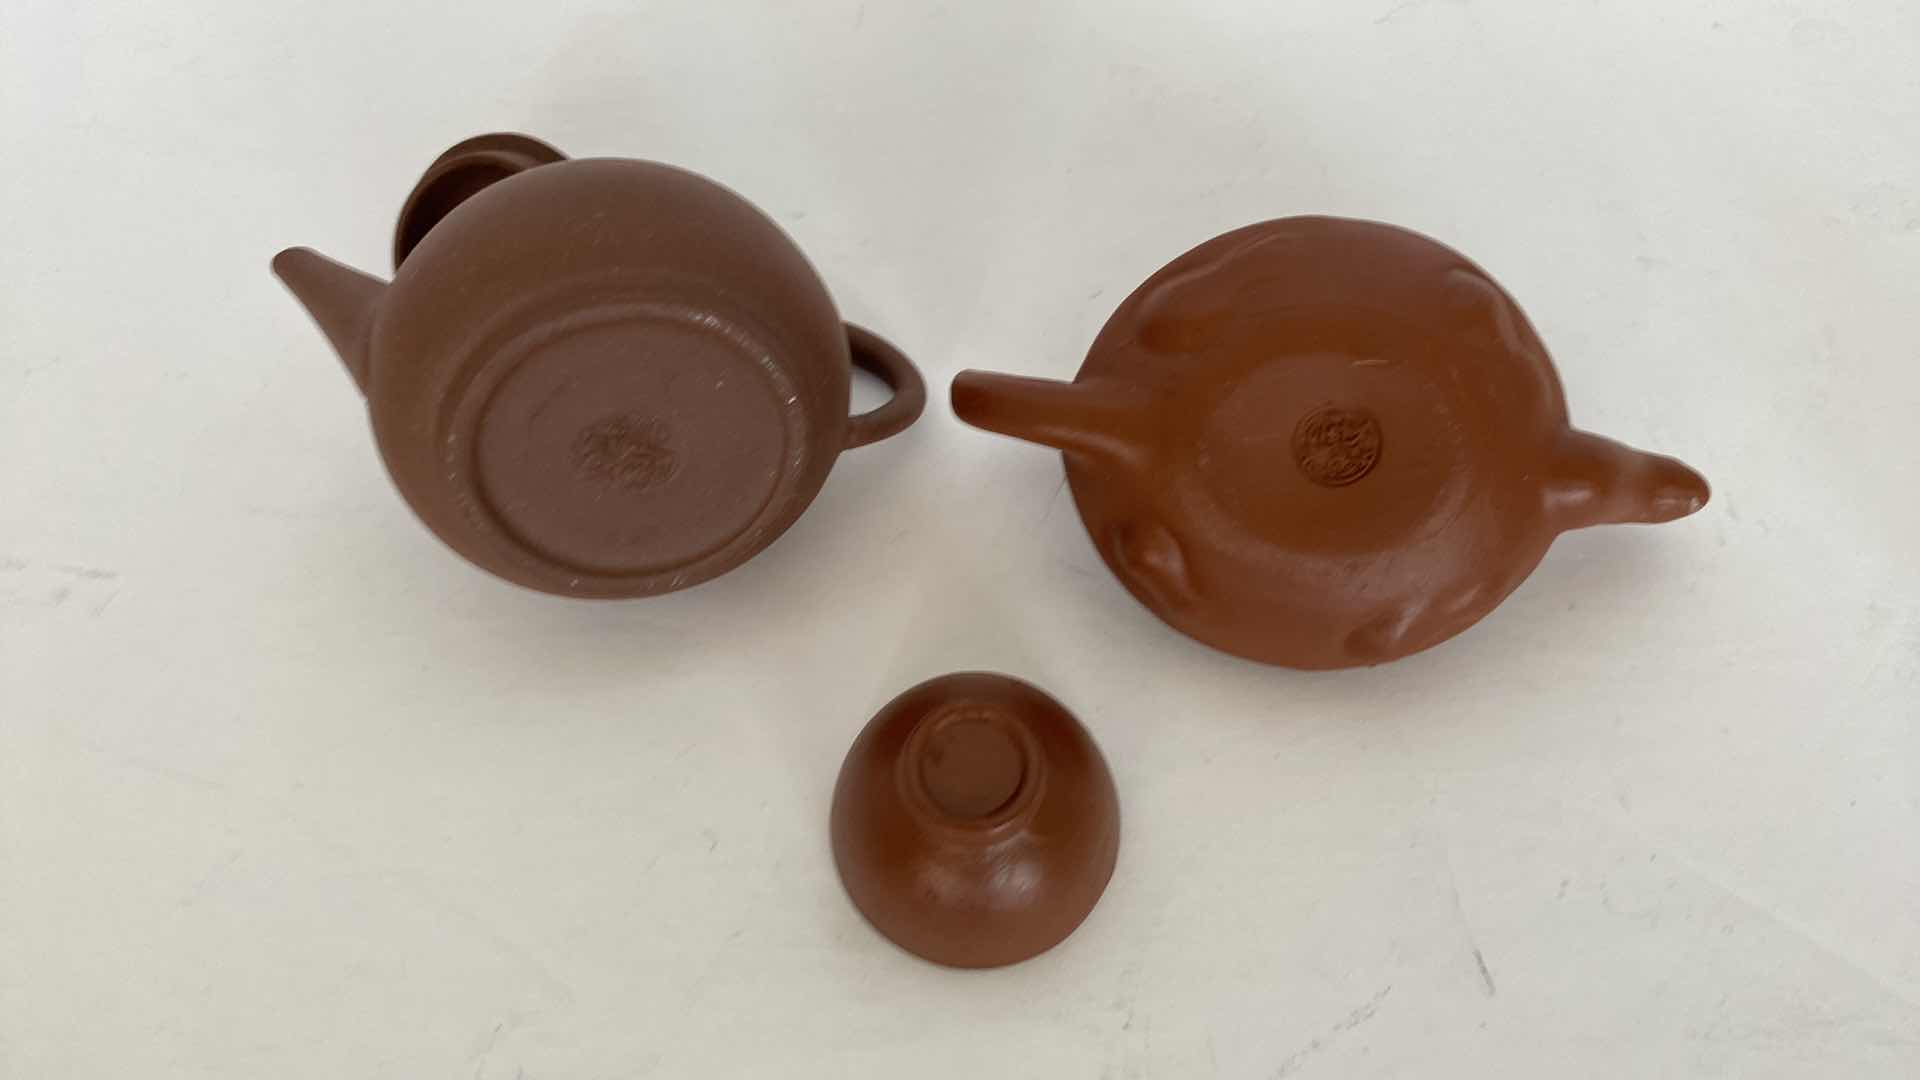 Photo 4 of PAIR OF VINTAGE CHINESE COLLECTIBLE CLAY TEA POTS WITH 4 TEA CUPS LARGEST TEAPOT 4” x 1 1/2”